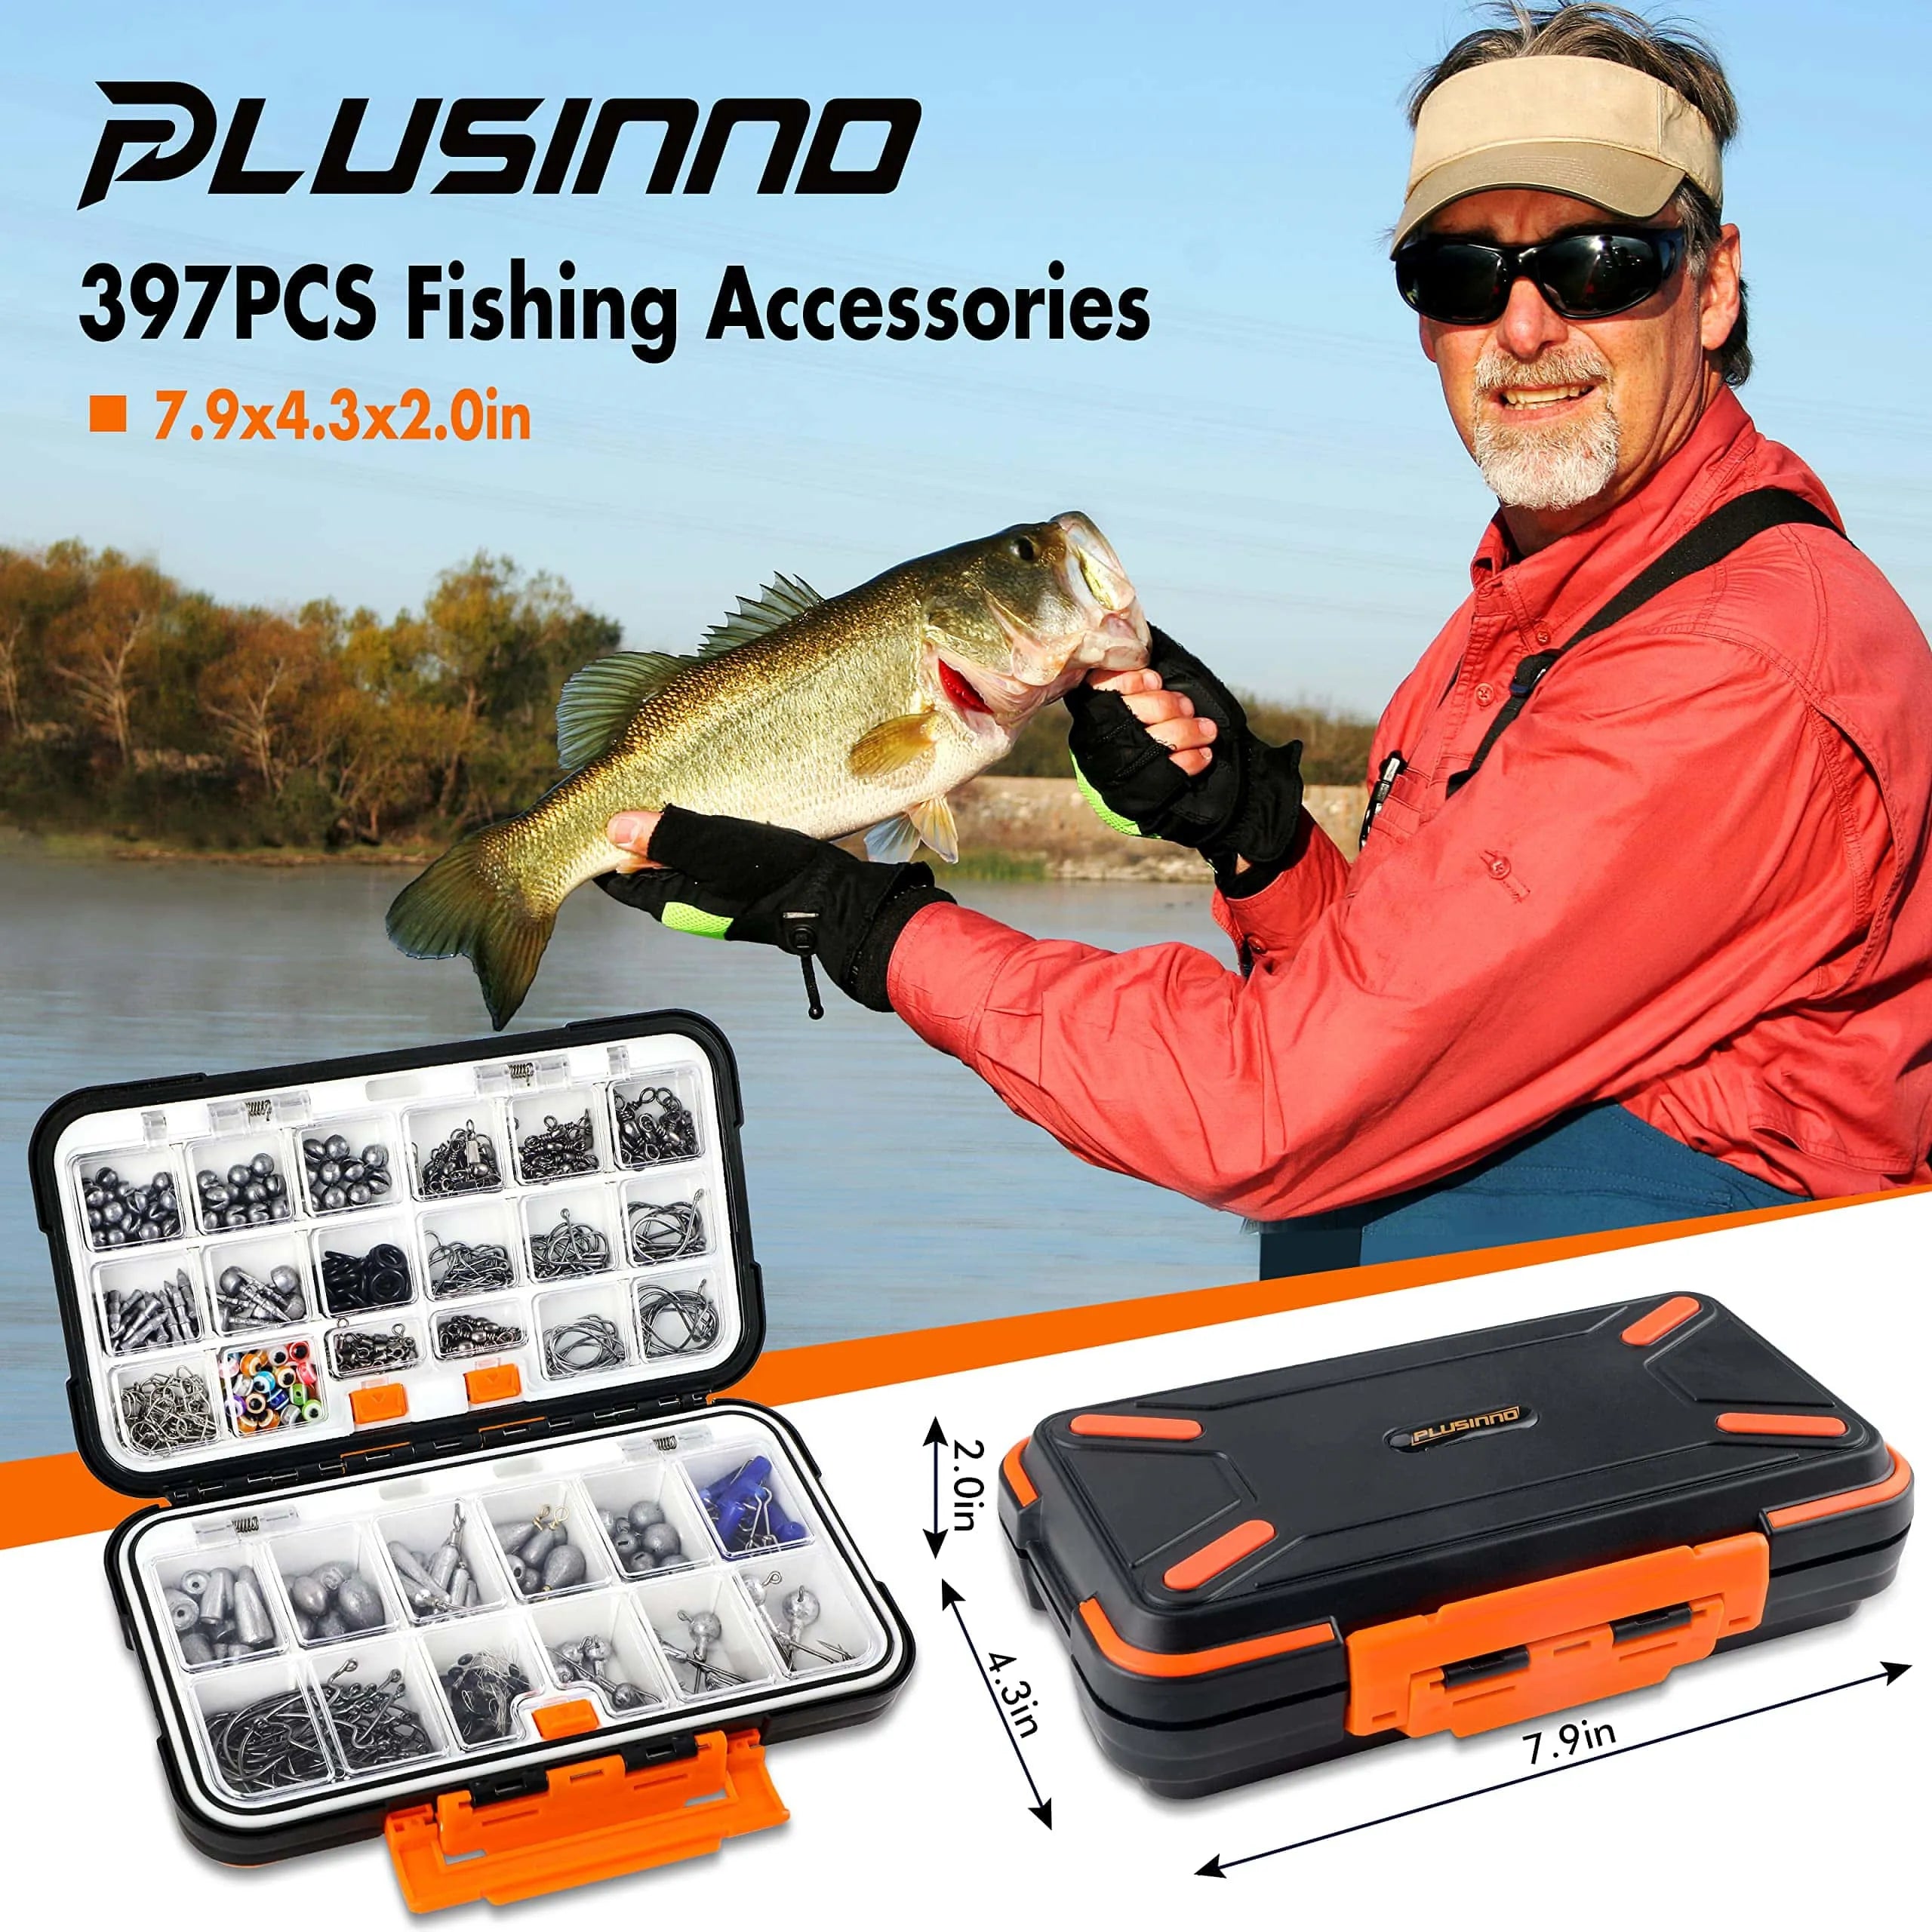  PLUSINNO 253pcs Fishing Accessories Kit, Fishing Tackle Box  with Tackle Included, Fishing Hooks, Fishing Weights Sinkers, Spinner  Blade, Fishing Gear for Bass, Bluegill, Crappie, Fishing : Sports & Outdoors